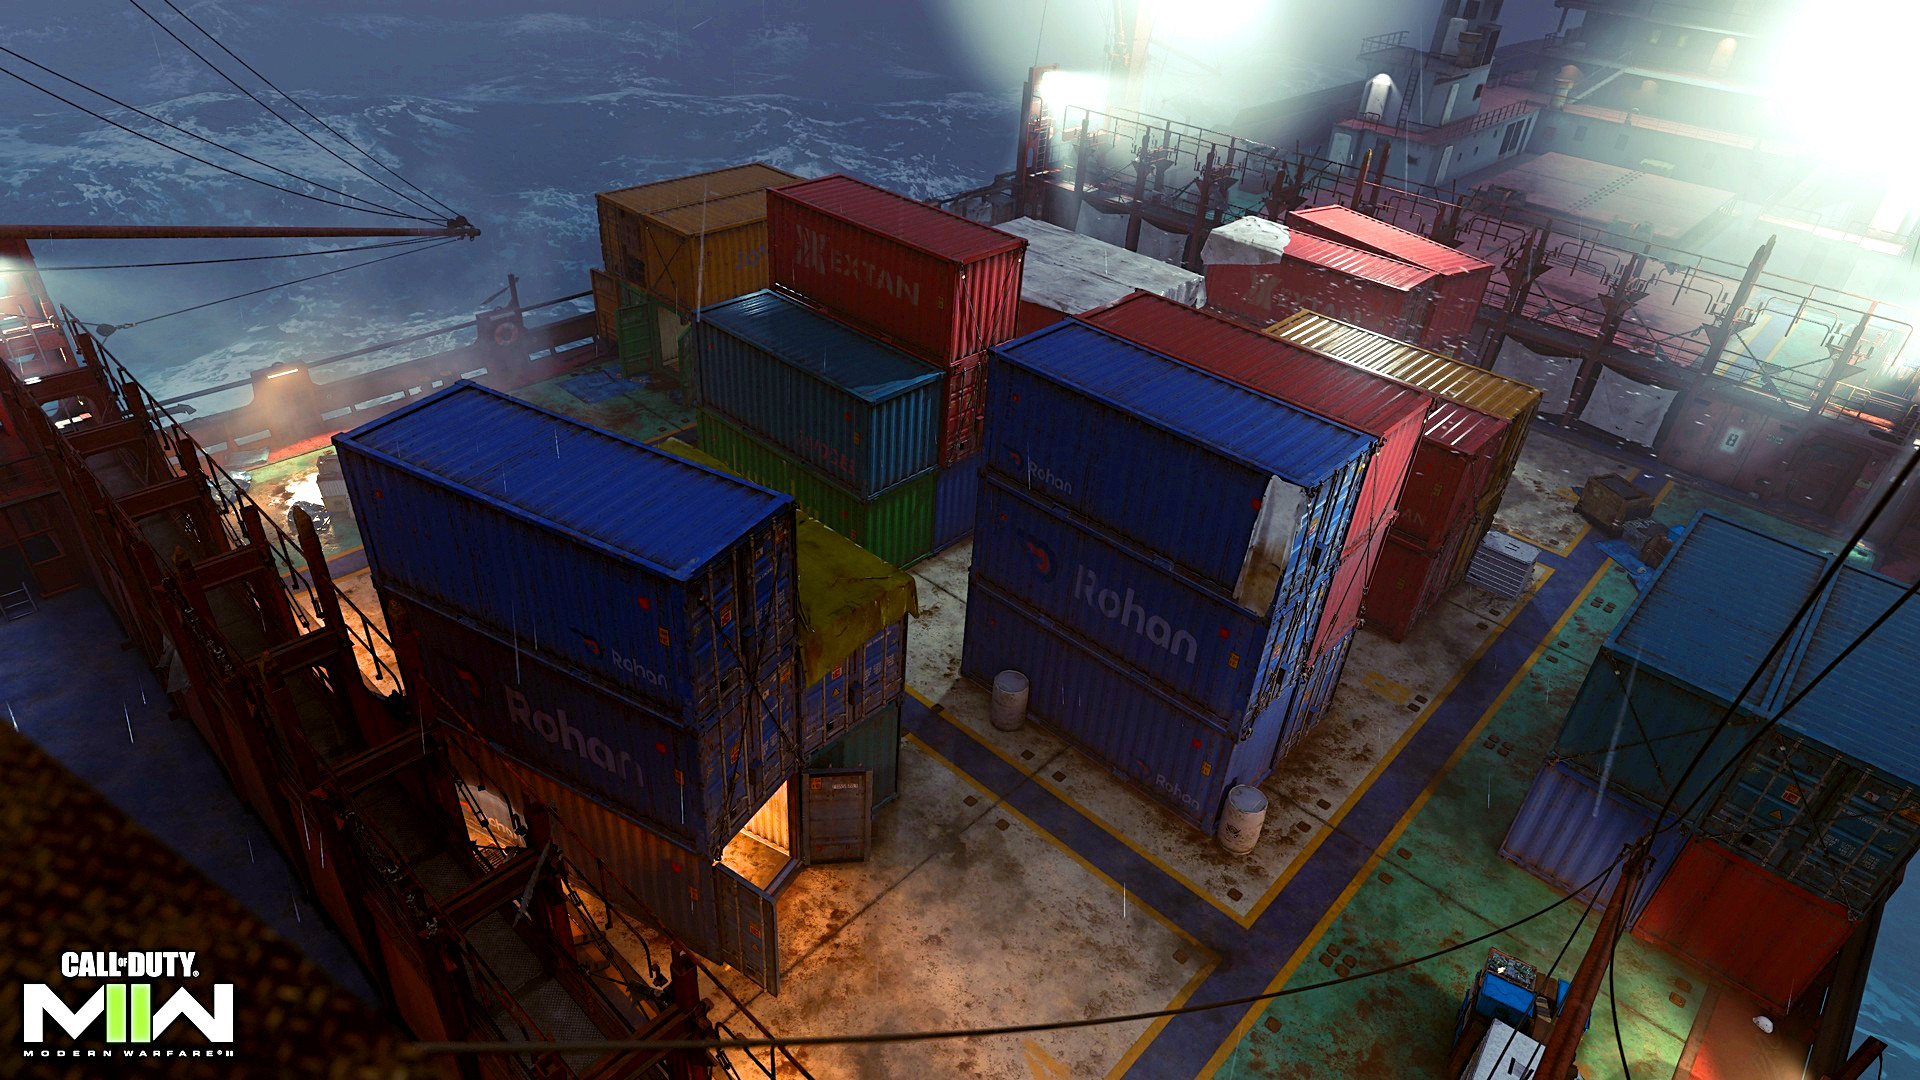 (MW2 appropriately moves Shipment to a ship in the Atlantic, but of course the layout remains the same.)